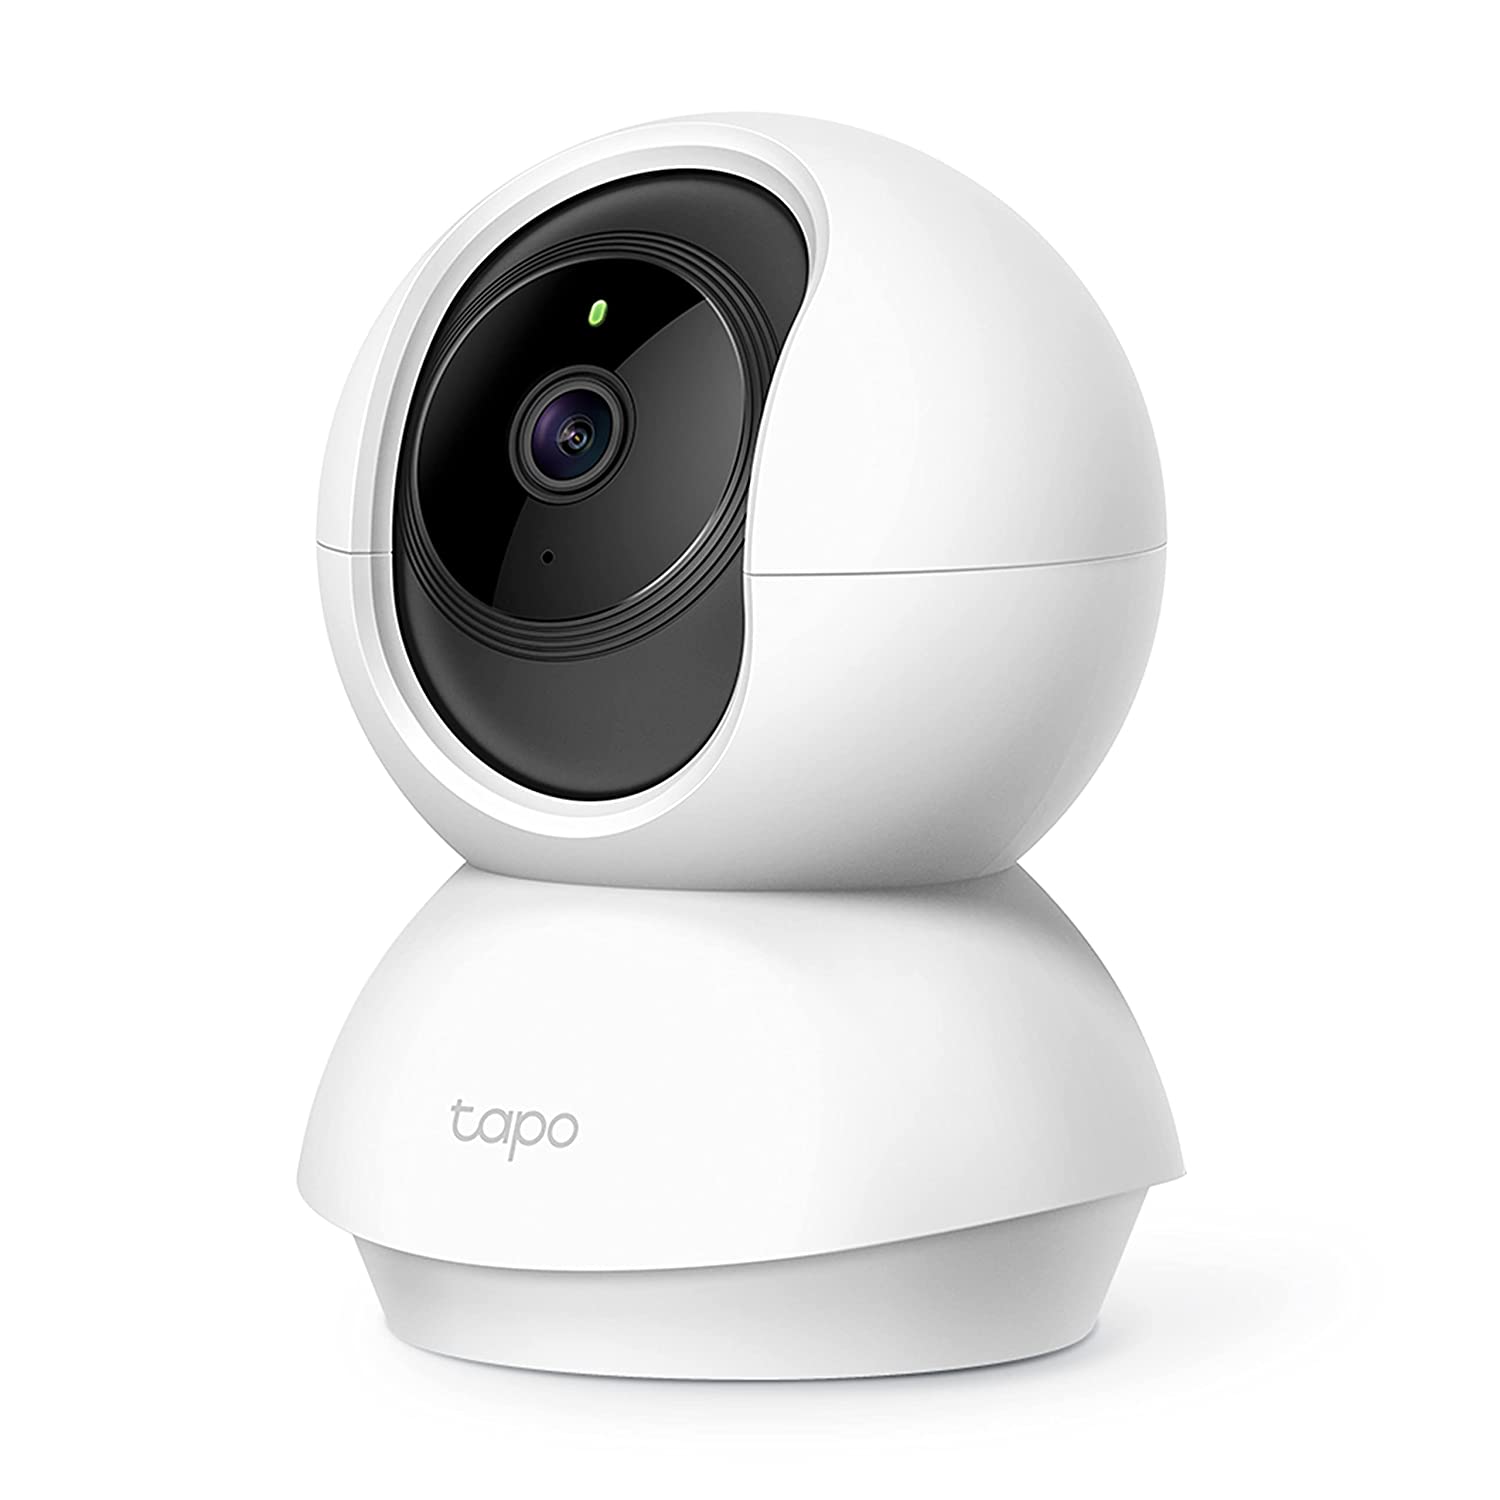 TP-Link Tapo WiFi Pan/Tilt Smart CCTV camera for home with mobile connectivity